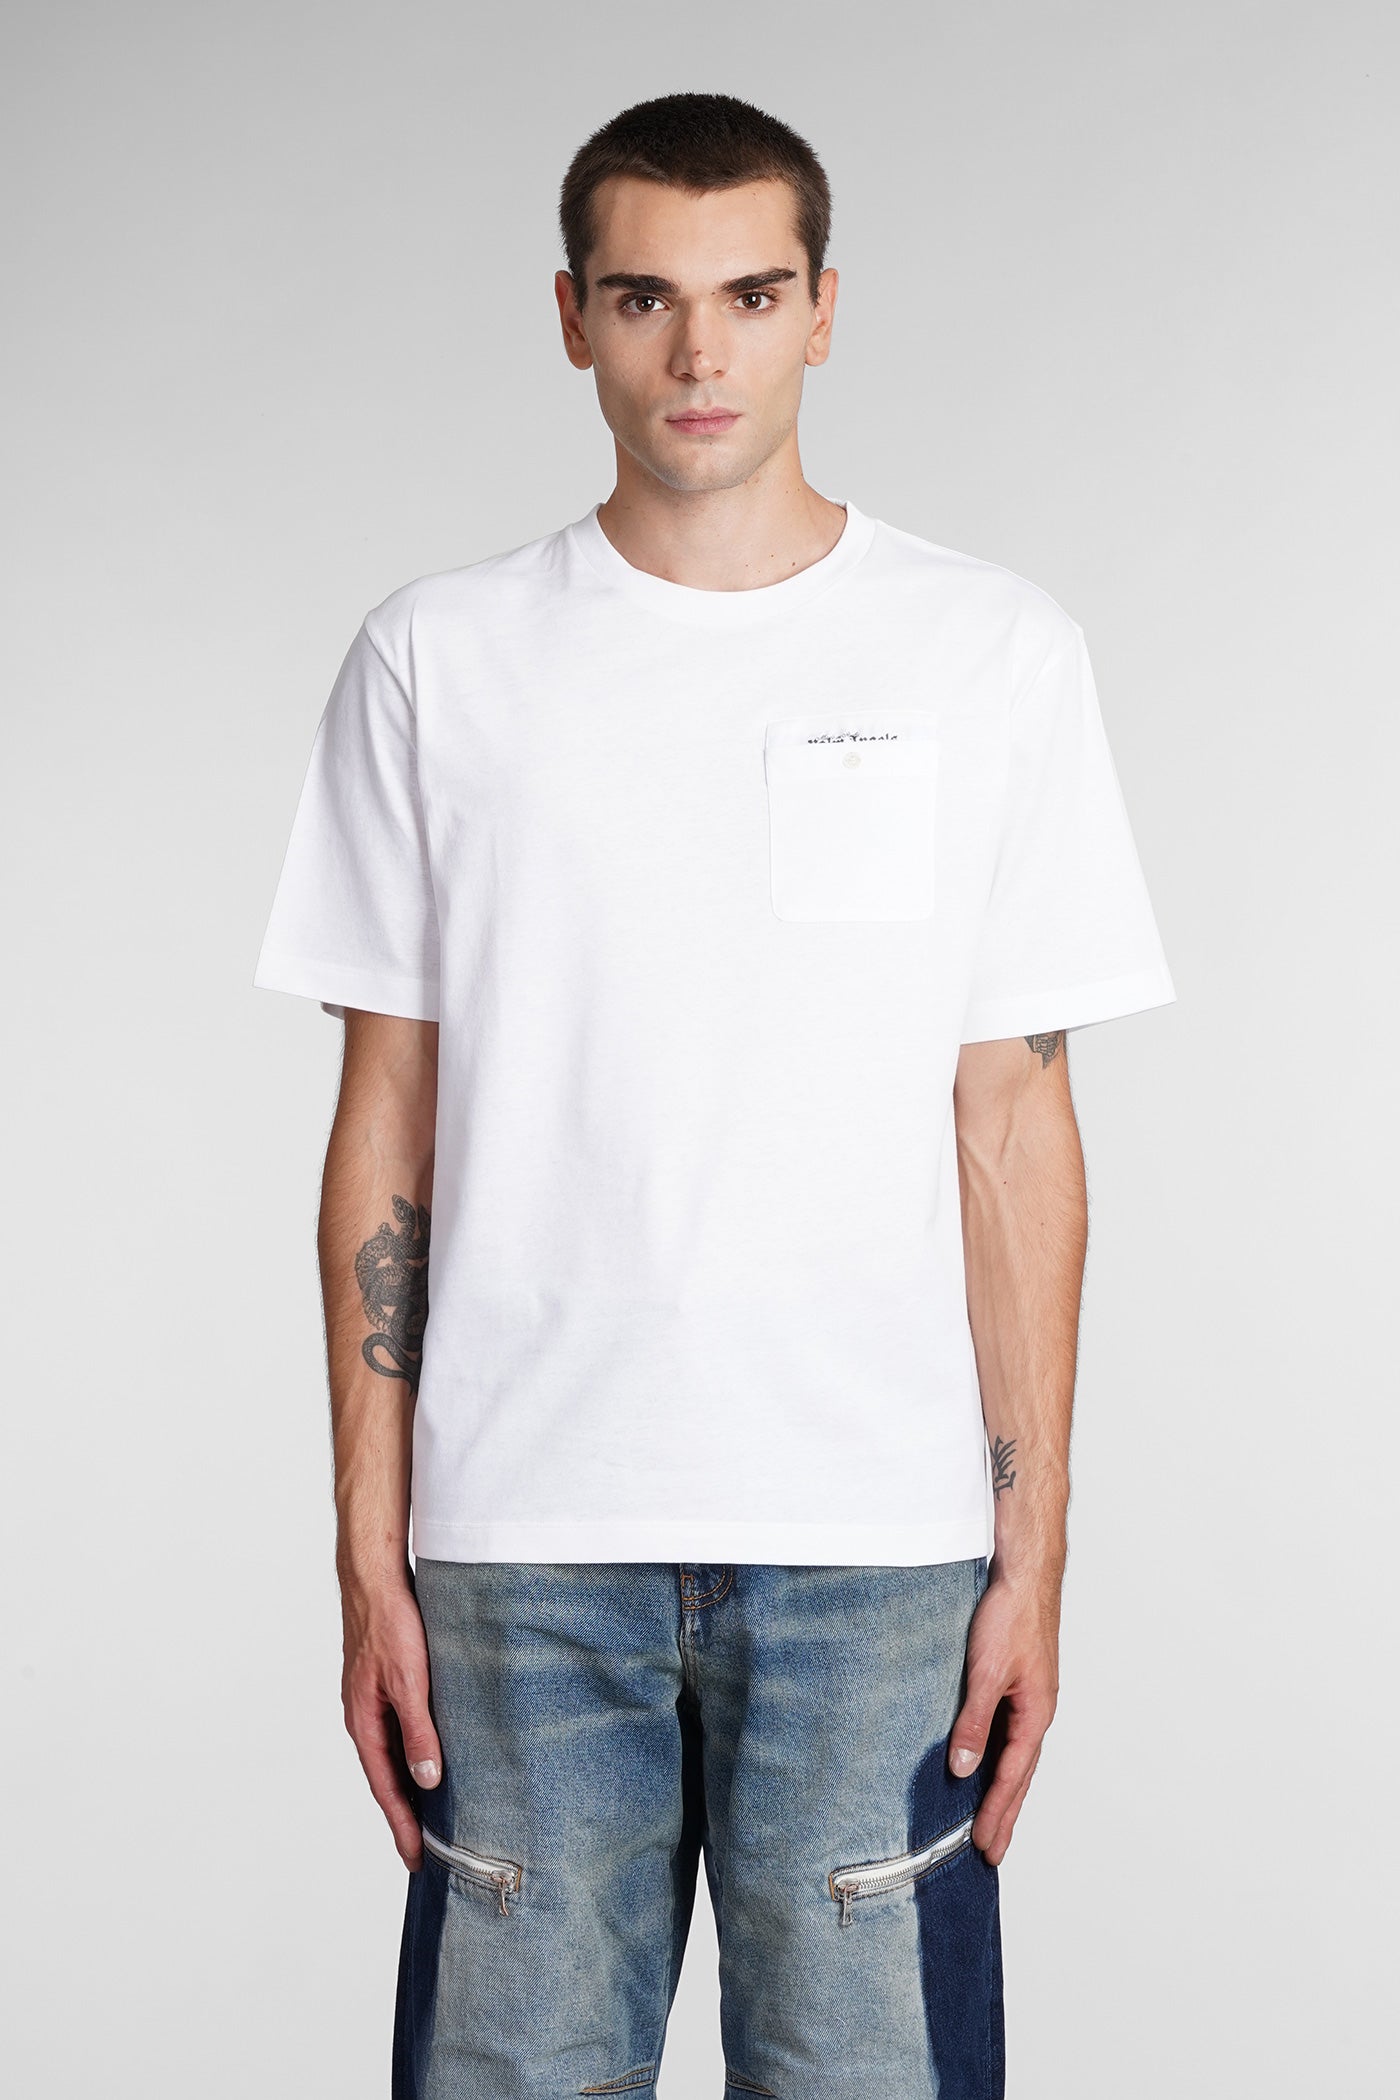 Palm Angels - T-Shirt in white cotton